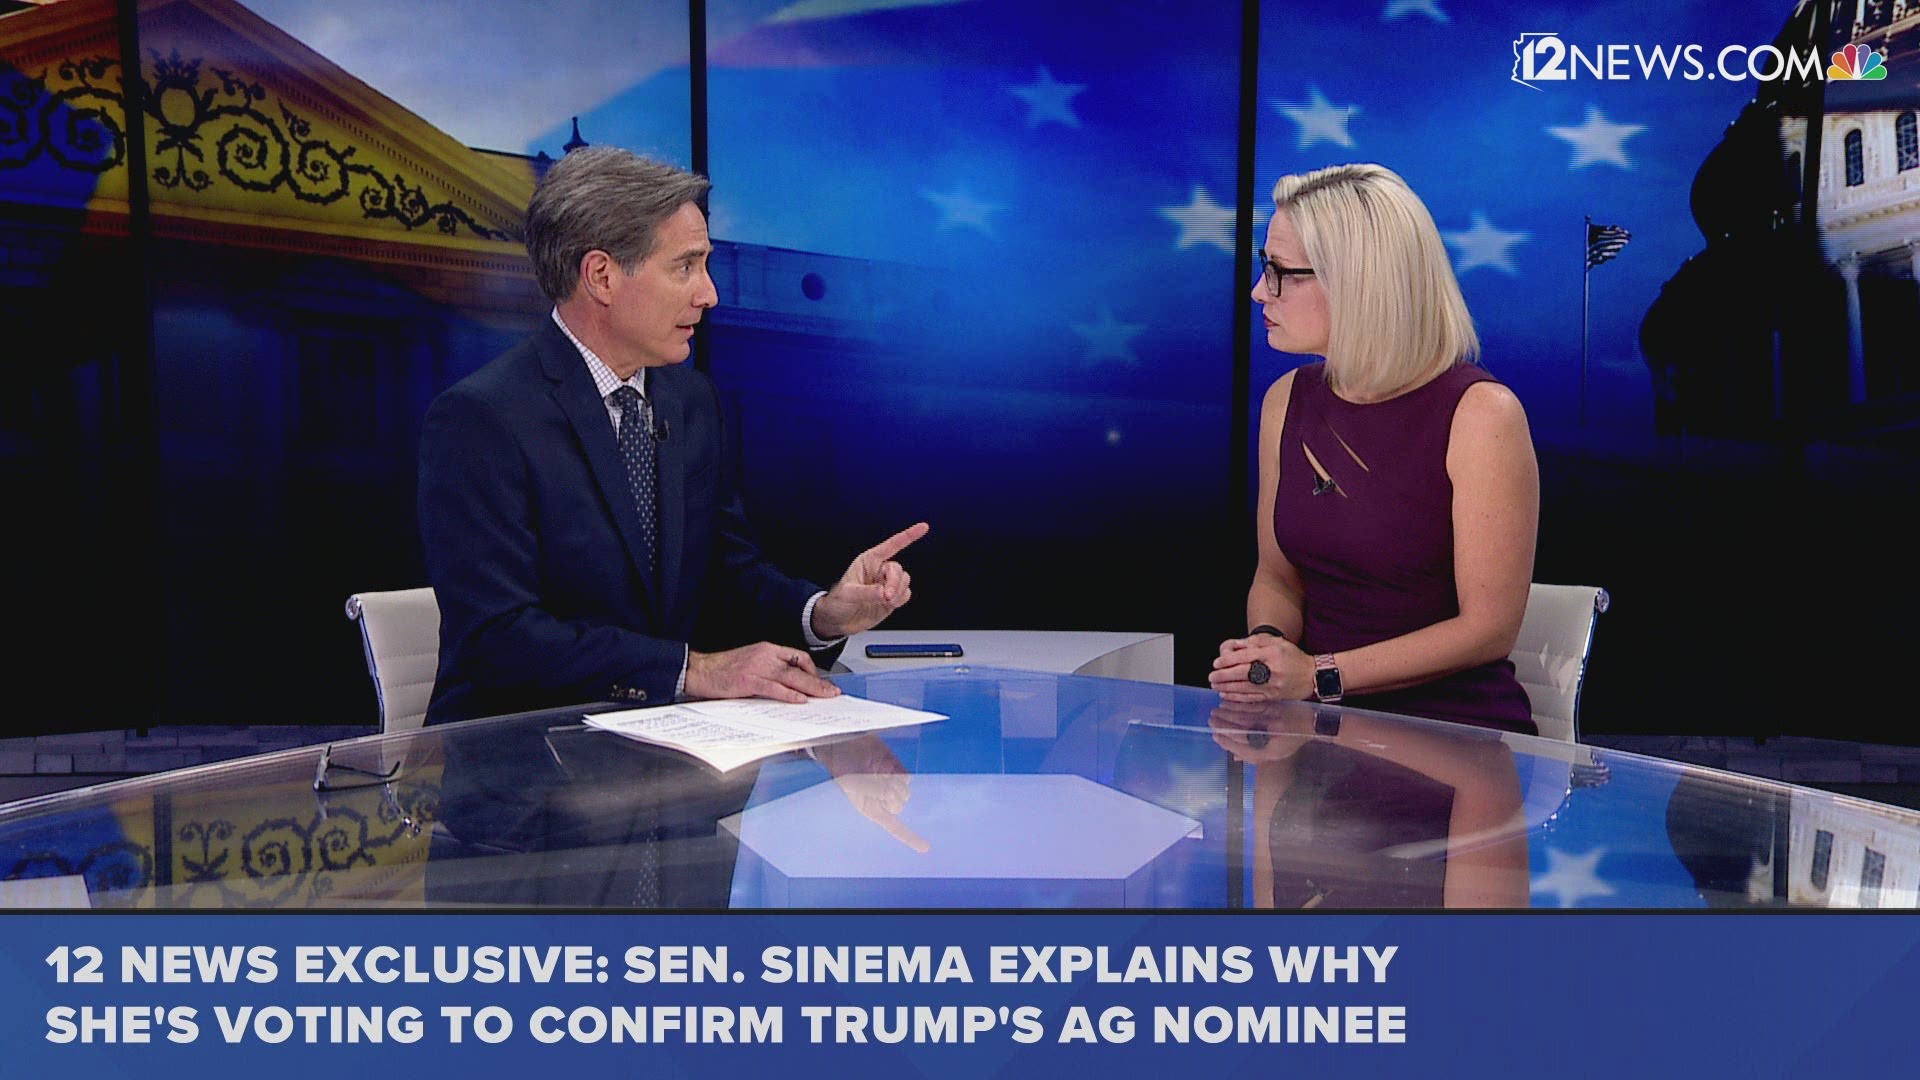 Brahm Resnik reads the vision of Arizona that Sen. Kyrsten Sinema shared in her victory speech. Does she believe attorney general nominee William Barr shares it and will defend it?